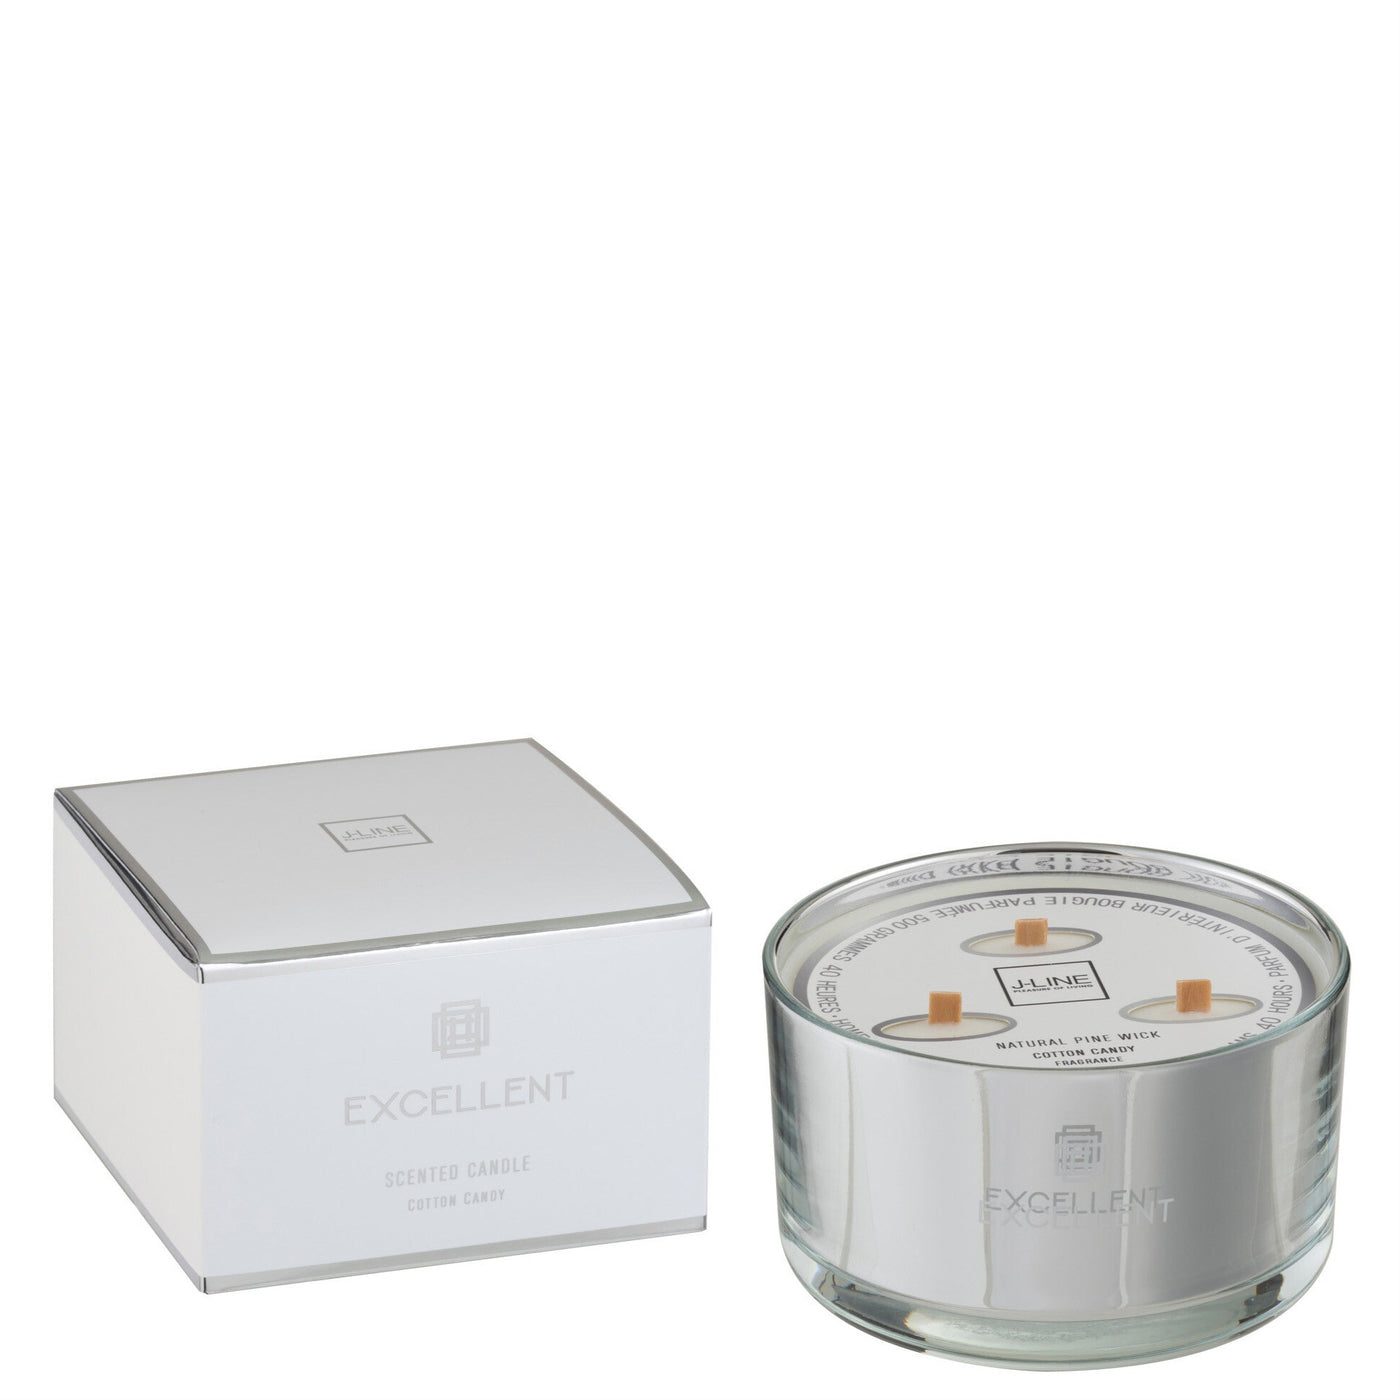 SCENTED CANDLE EXCELLENT COTTON CANDY SILVER LARGE-40HOURS